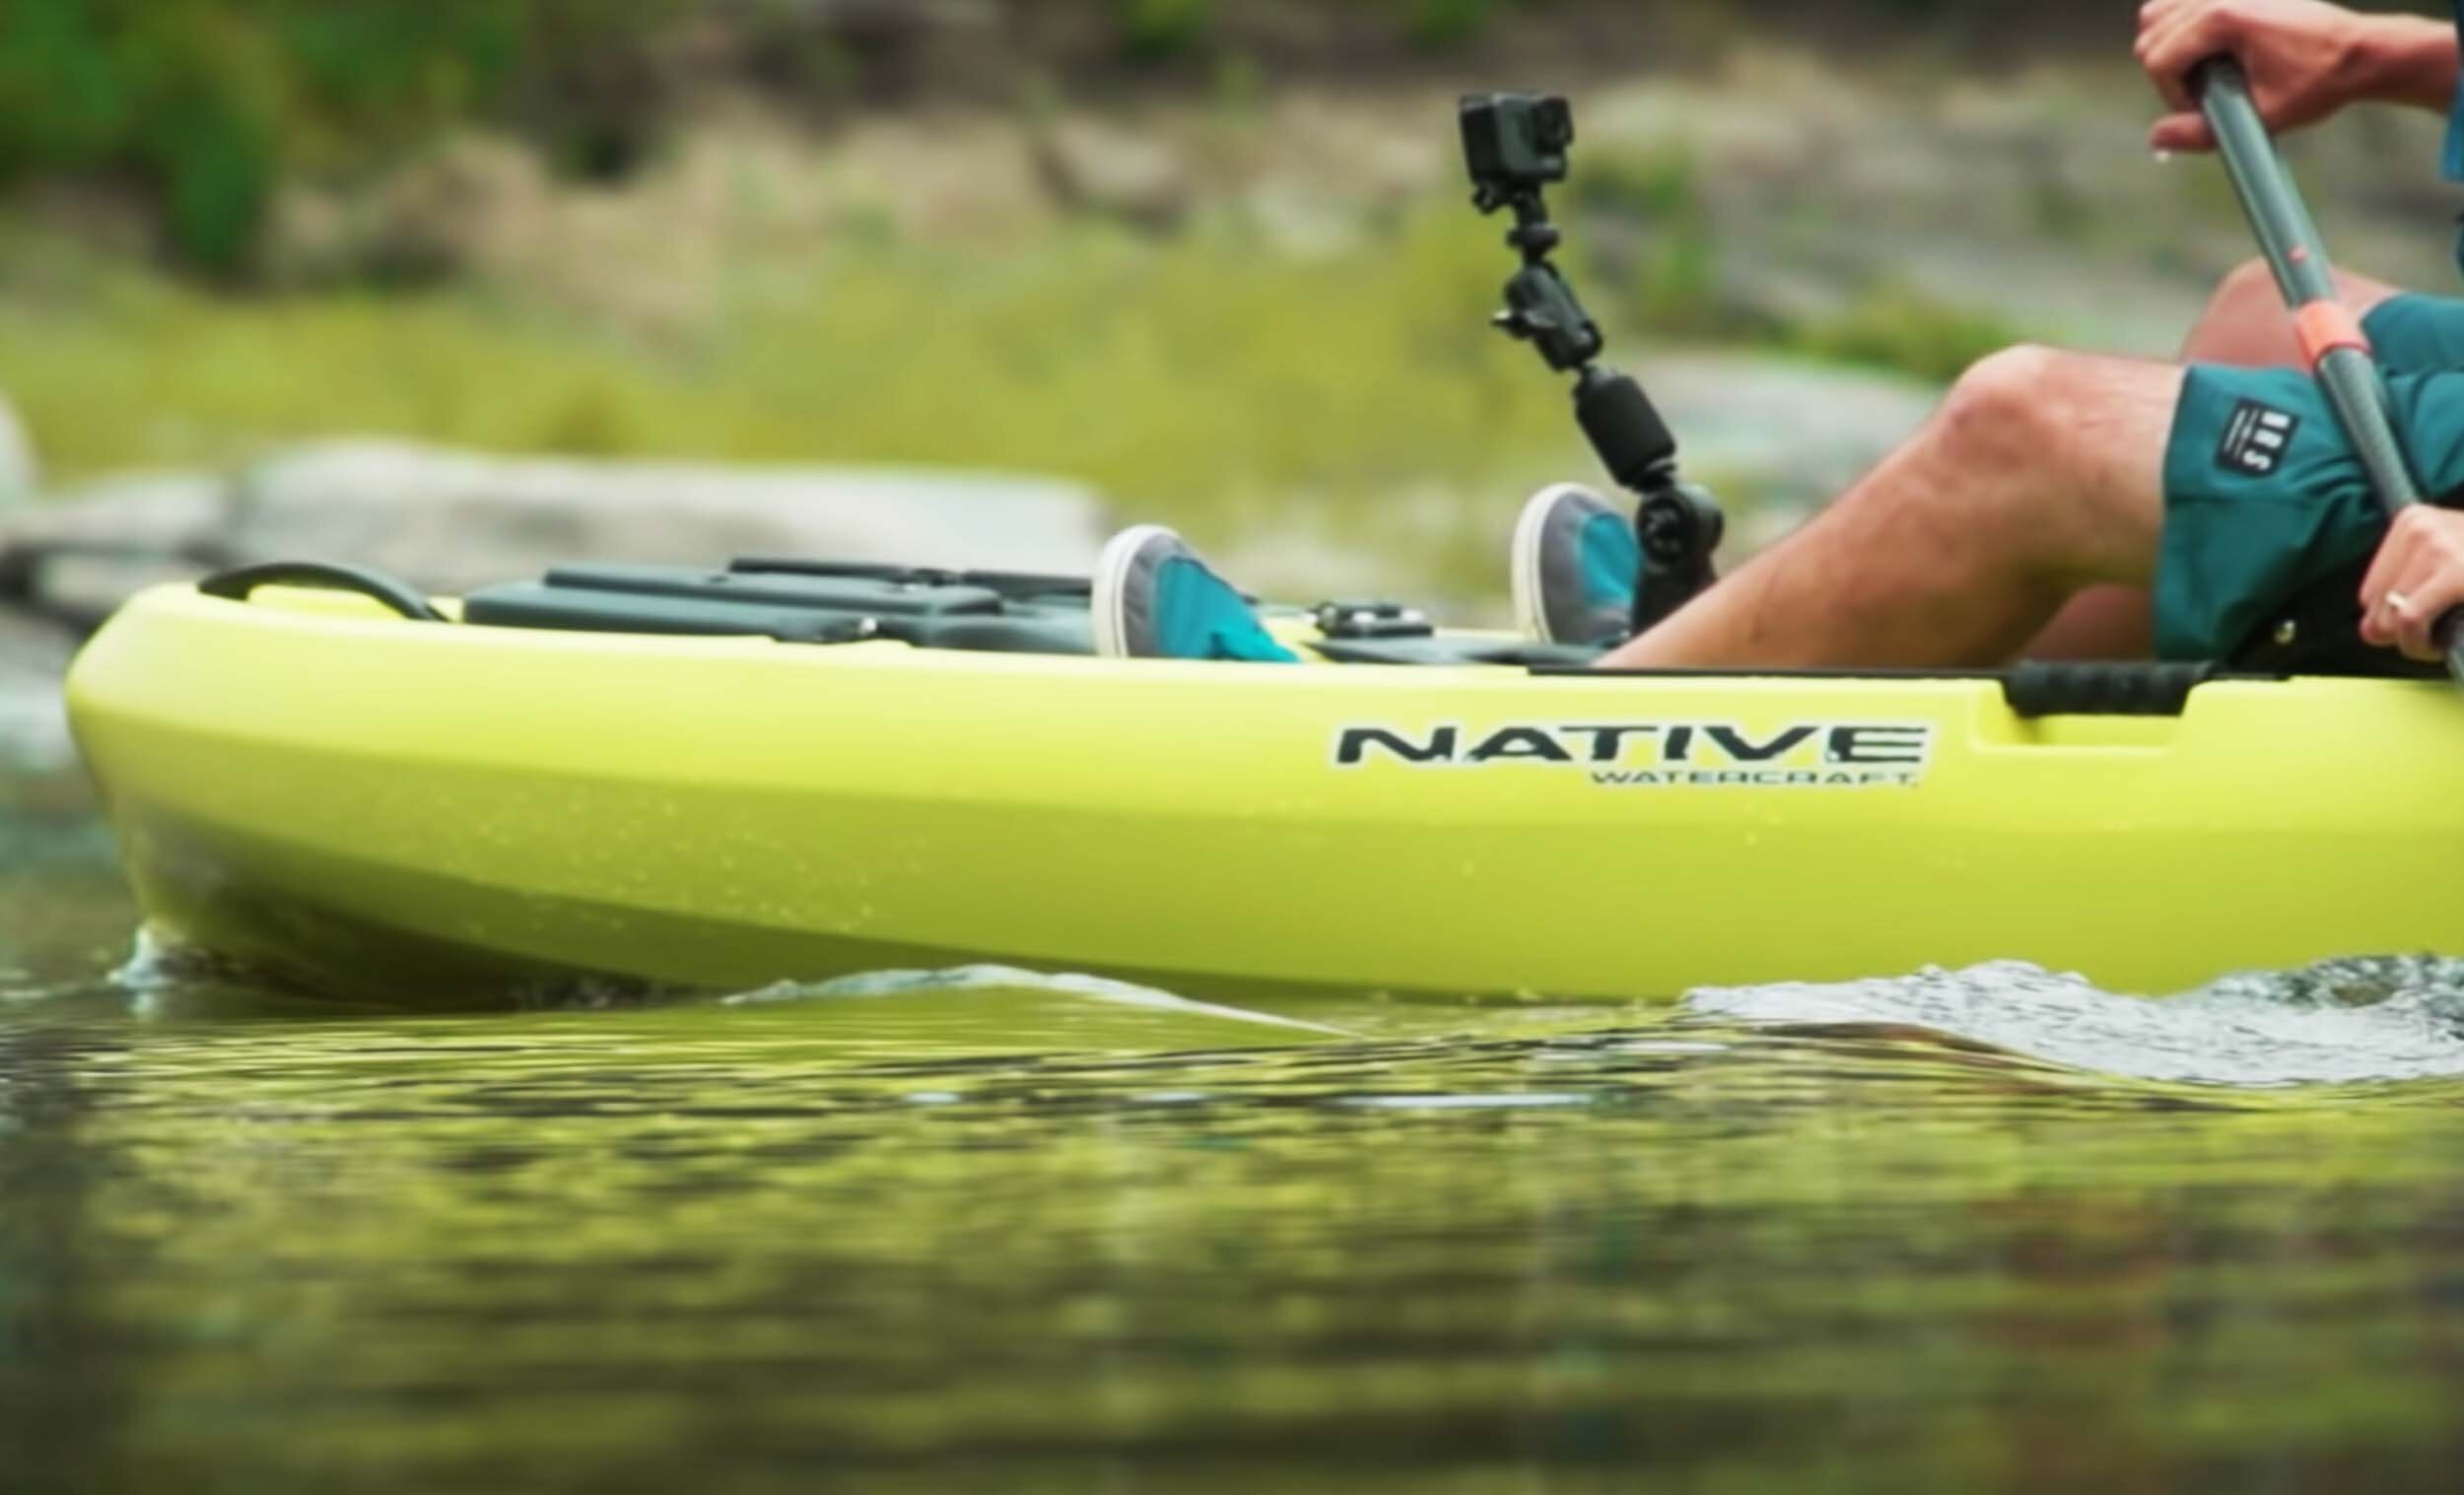 native falcon 11 ken whiting kayaking on flat water paddling beginner tips and gear review